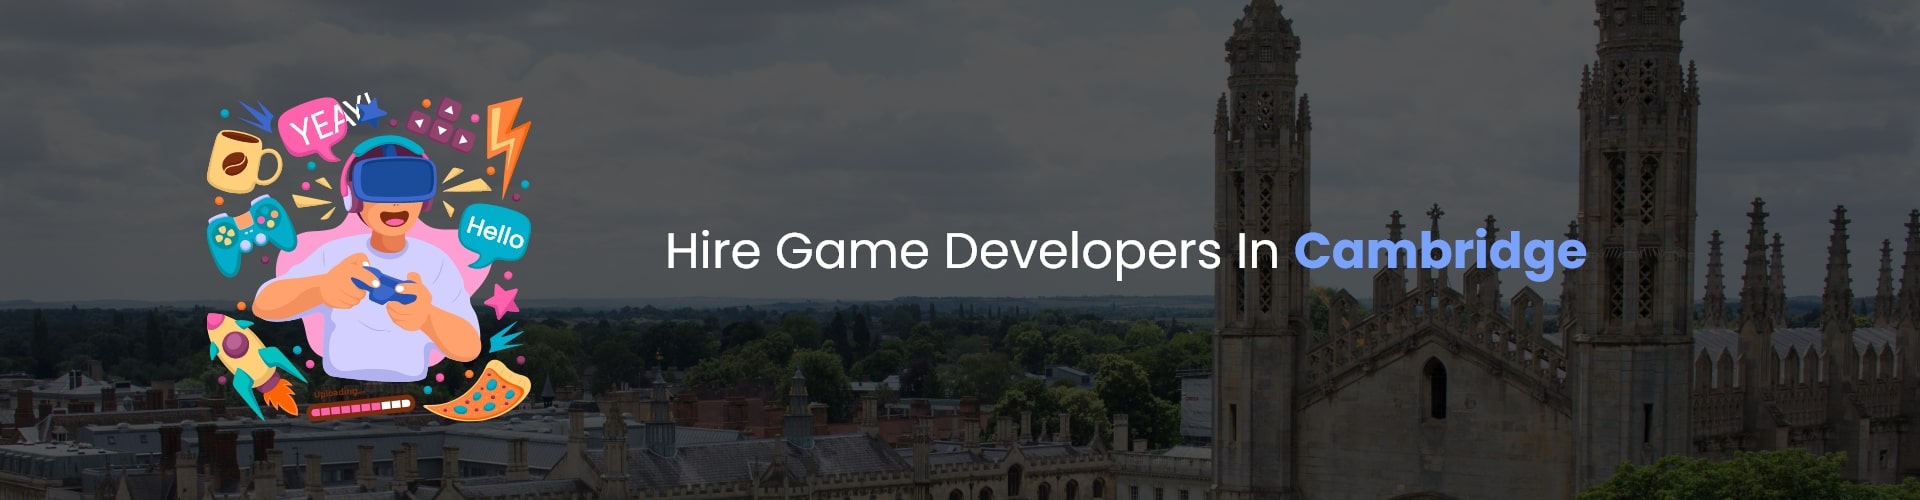 hire game developers in cambridge